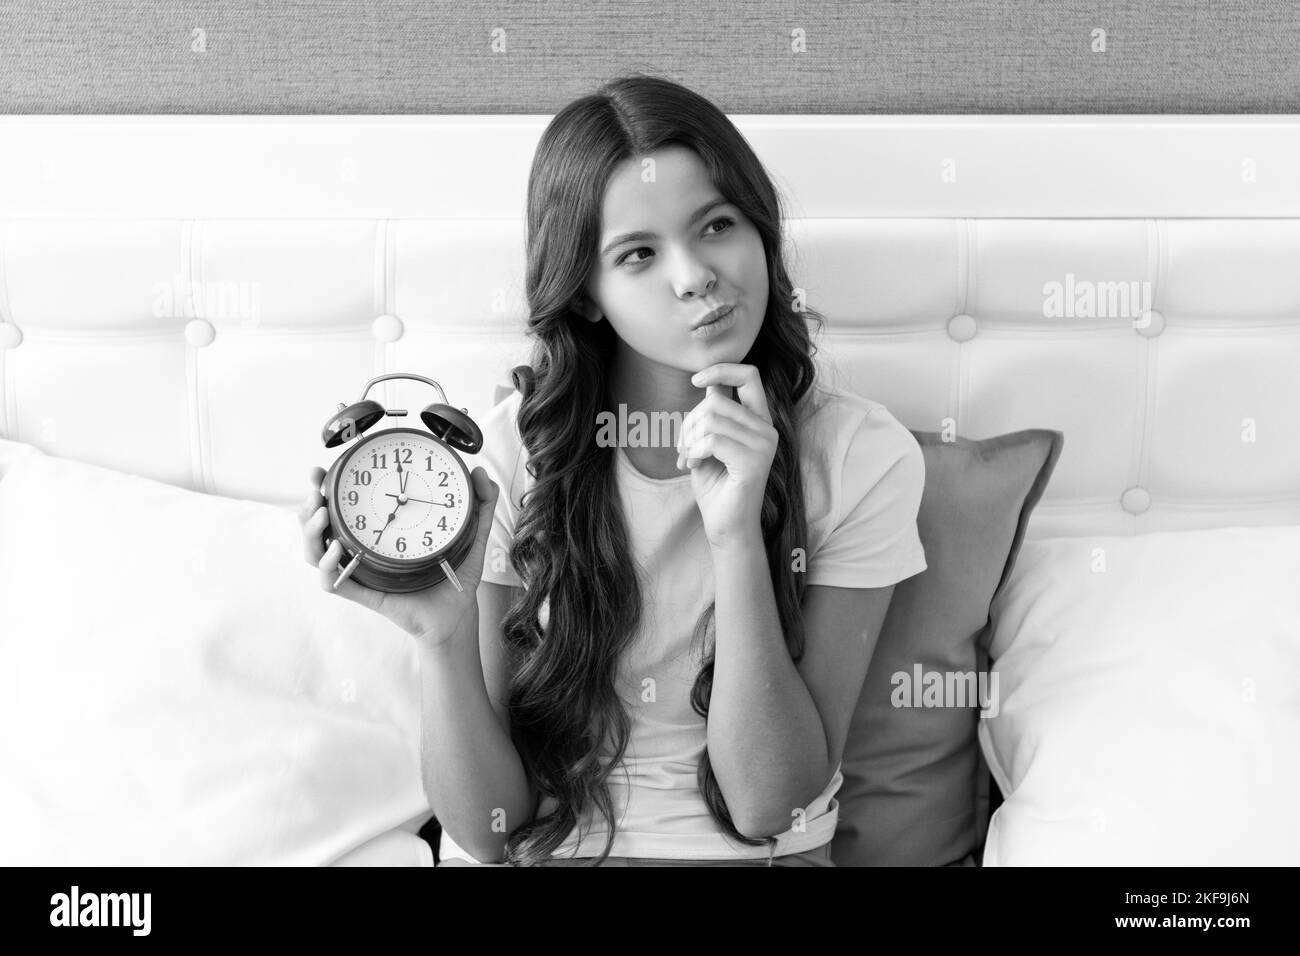 You never know when your time is coming. Kid look thoughtful with alarm clock. Using time creatively Stock Photo